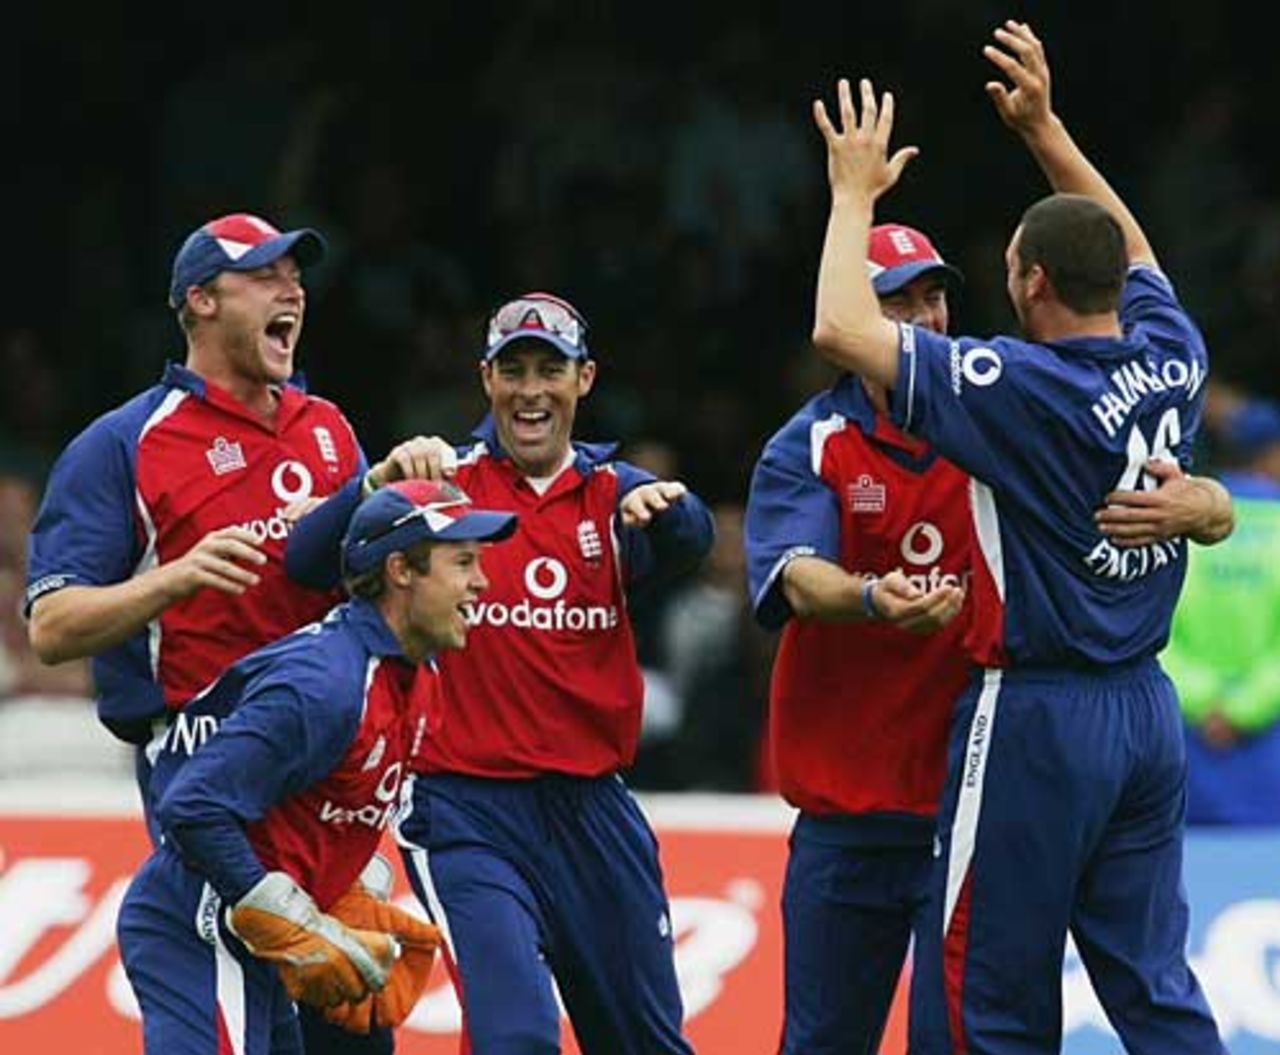 England show their delight as Steve Harmison removes Ricky Ponting, England v Australia, NatWest Series final, Lord's, July 2